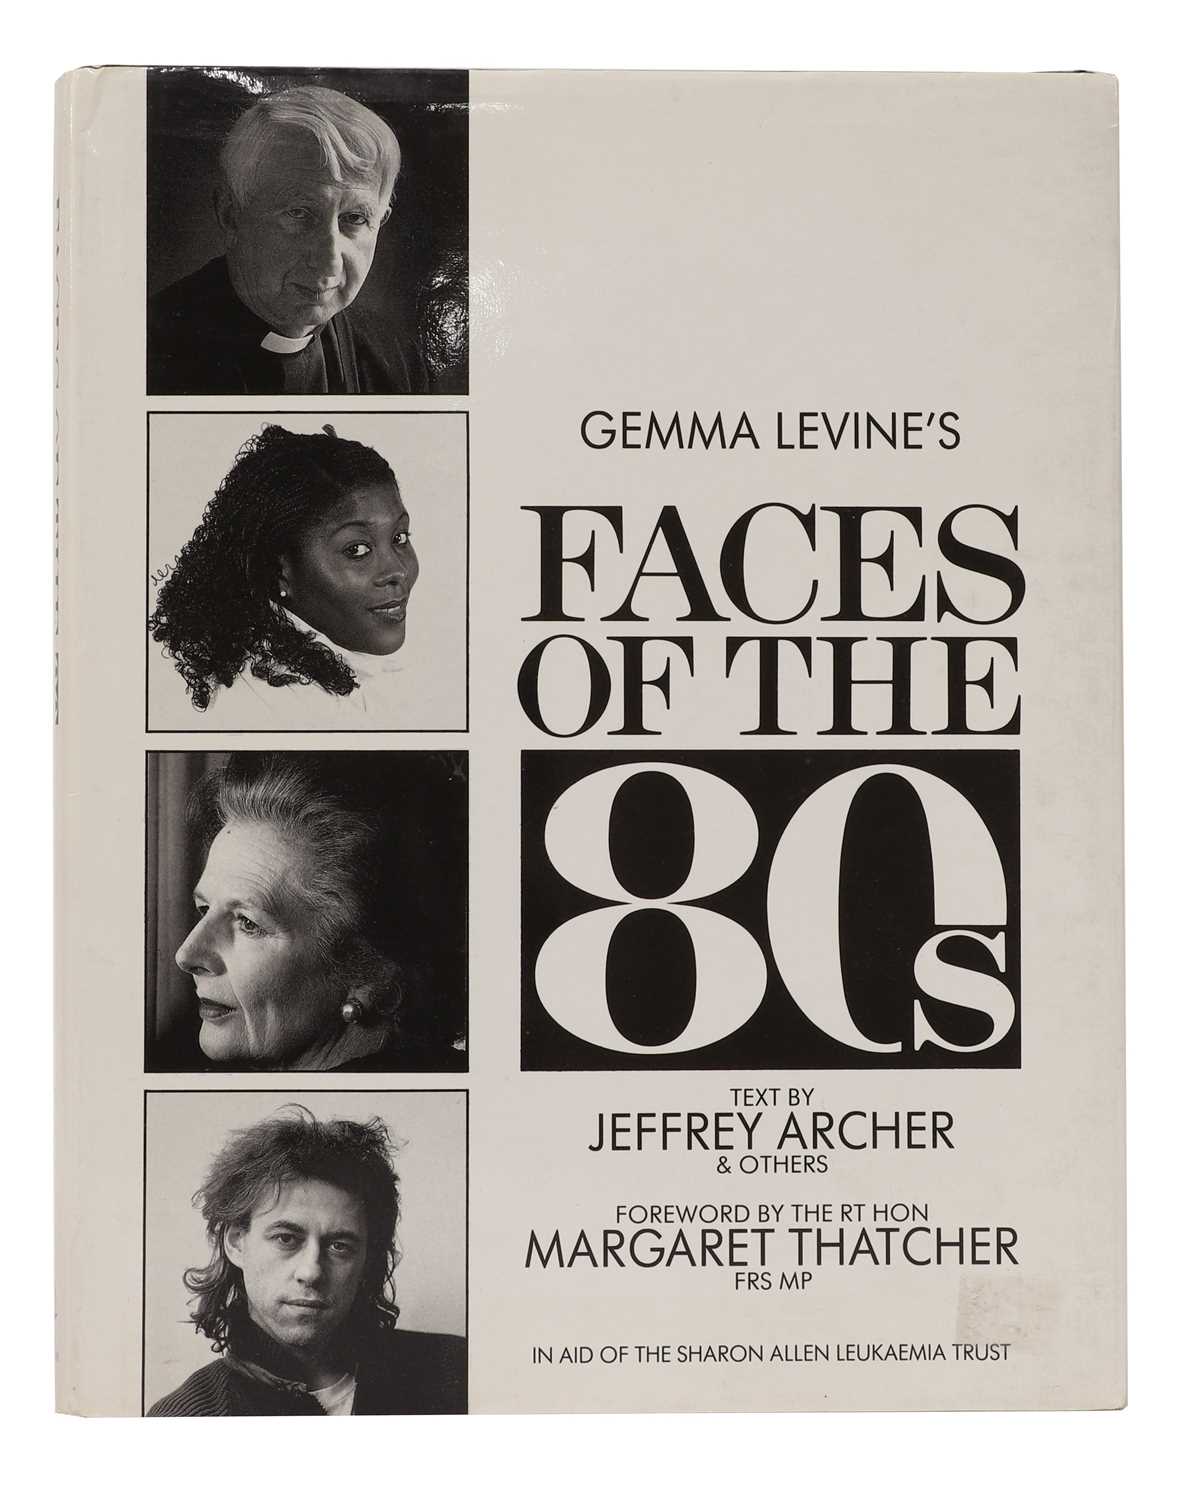 Gemma Levine: Faces of the 80s. - Image 2 of 3